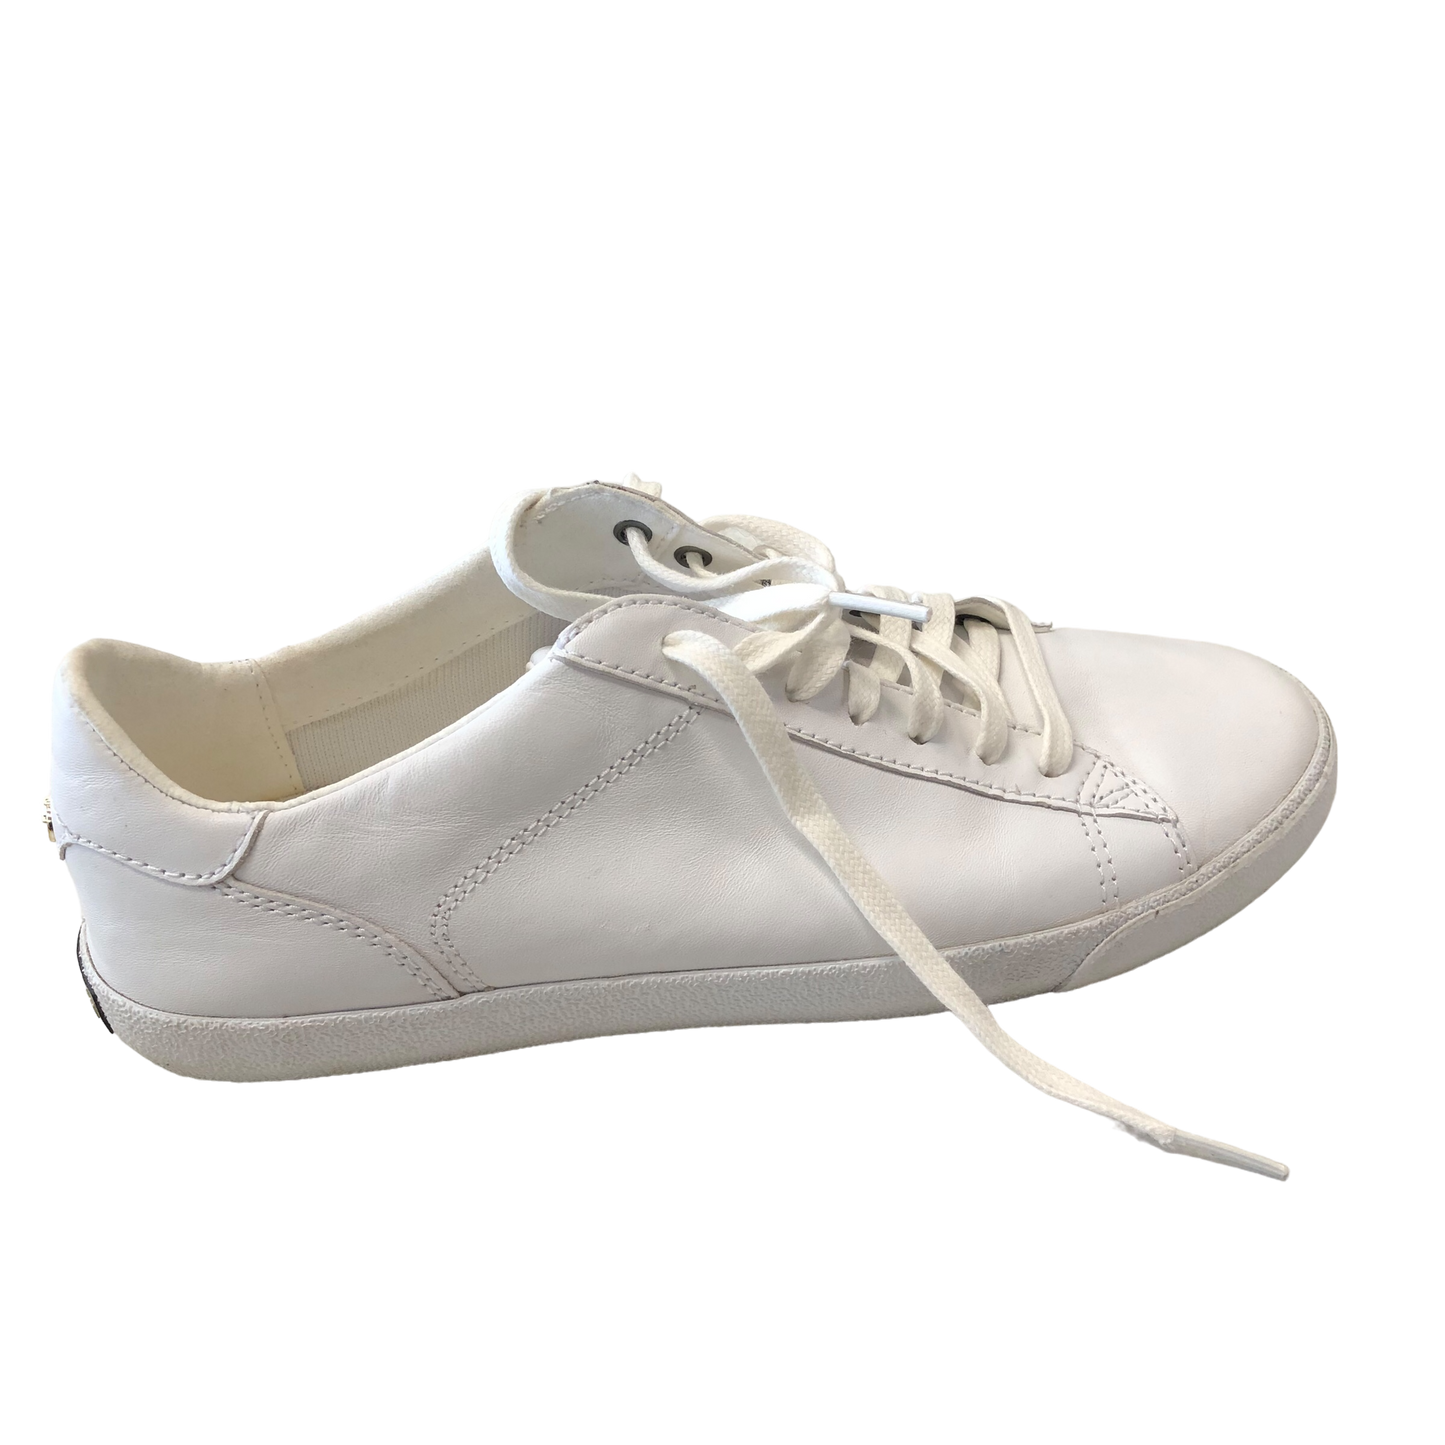 White Shoes Designer Cole-haan, Size 8